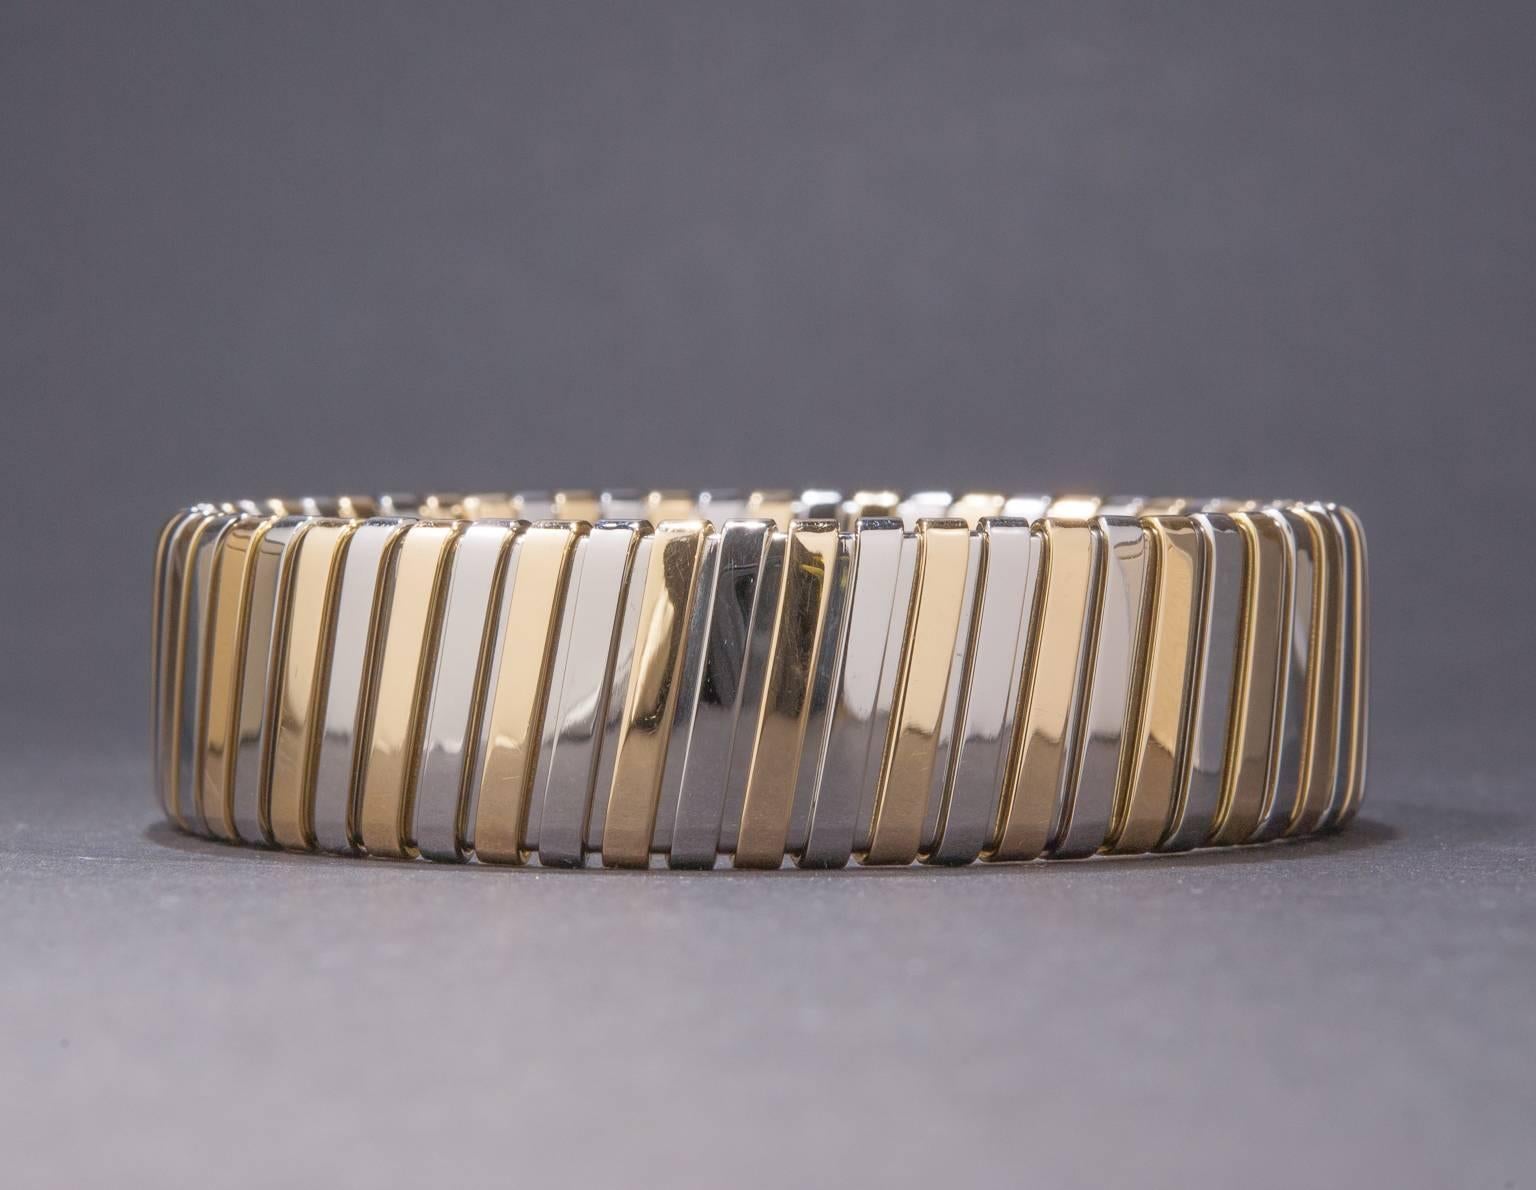 A stylish and attractive 18k two-tone gold bracelet designed by Bulgari. This Italian made piece has a flexible design that allows for a comfortable and secure fit on most wrist sizes. The bracelet measures approximately 15mm (slightly over 1/2